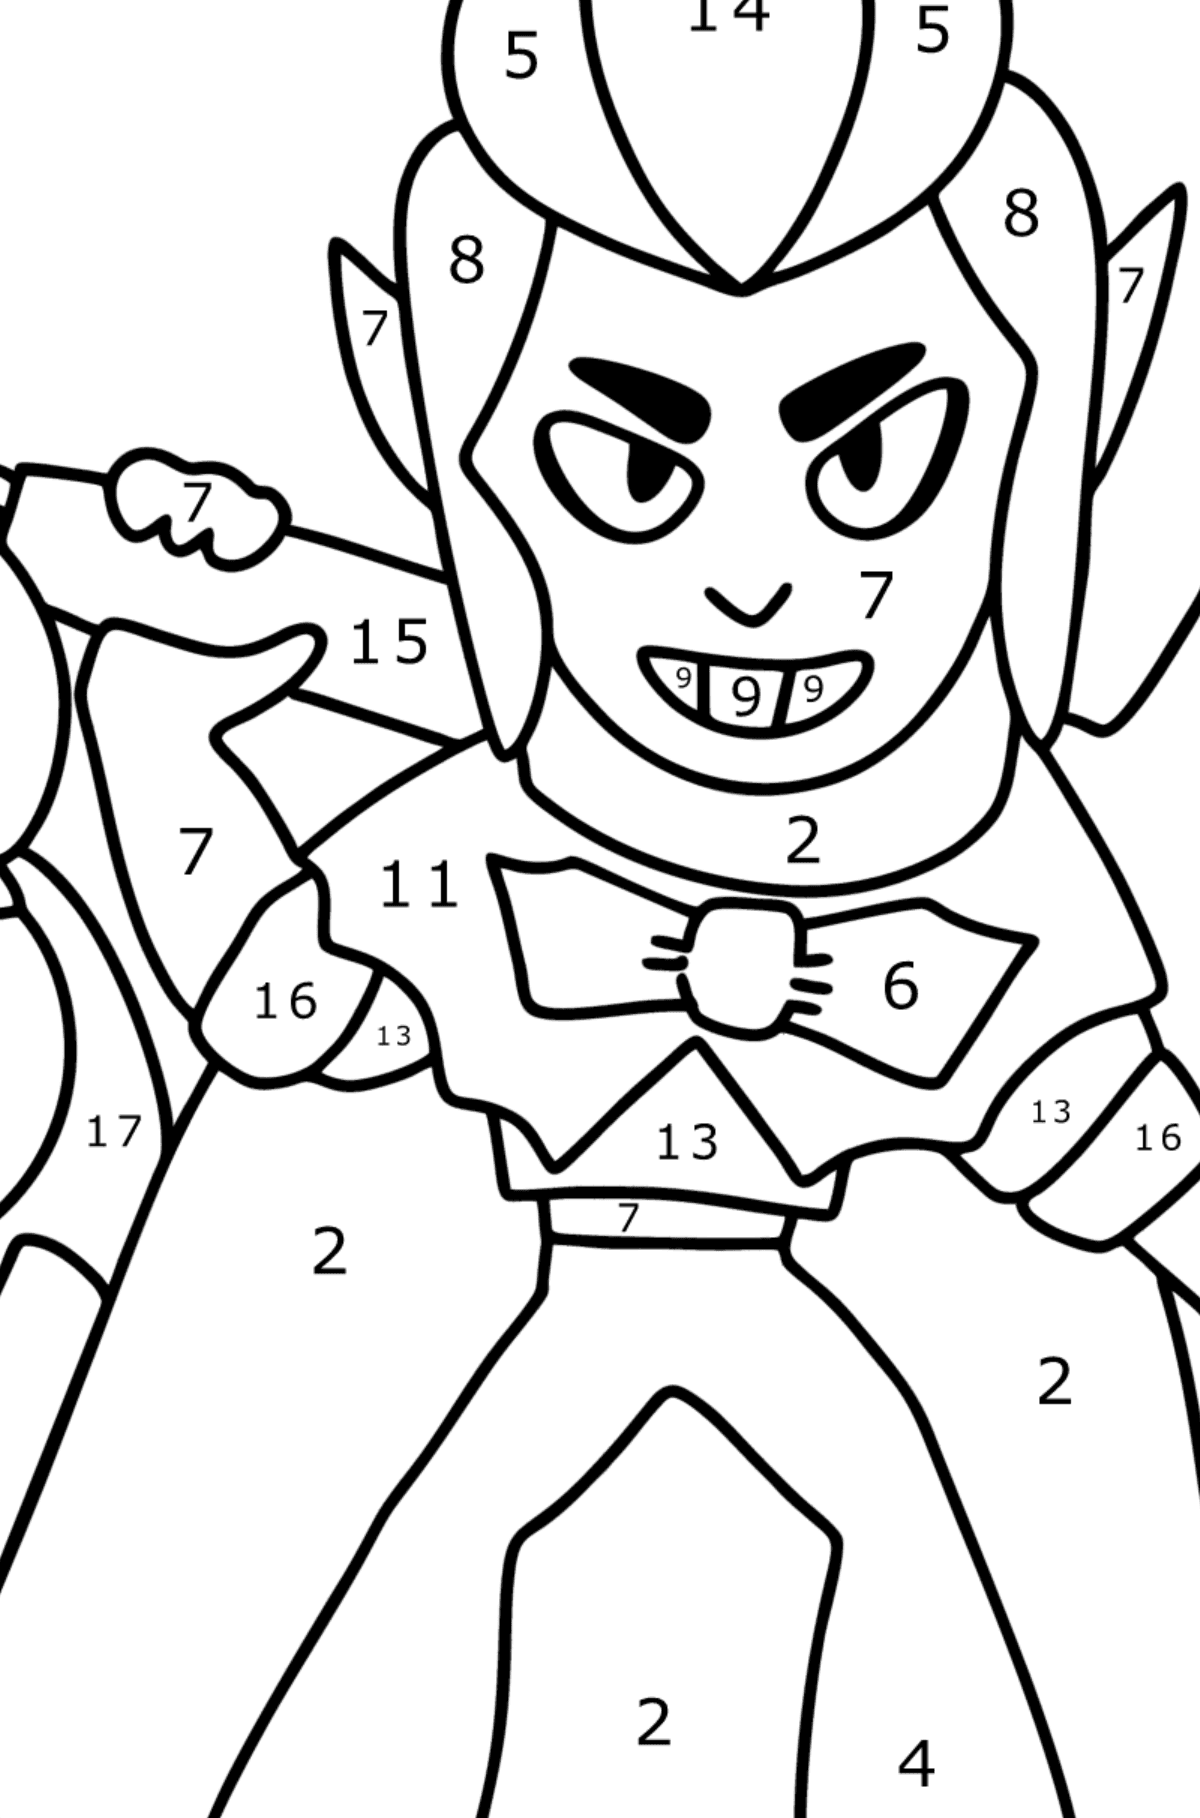 Brawl Stars Mortis coloring page - Coloring by Numbers for Kids